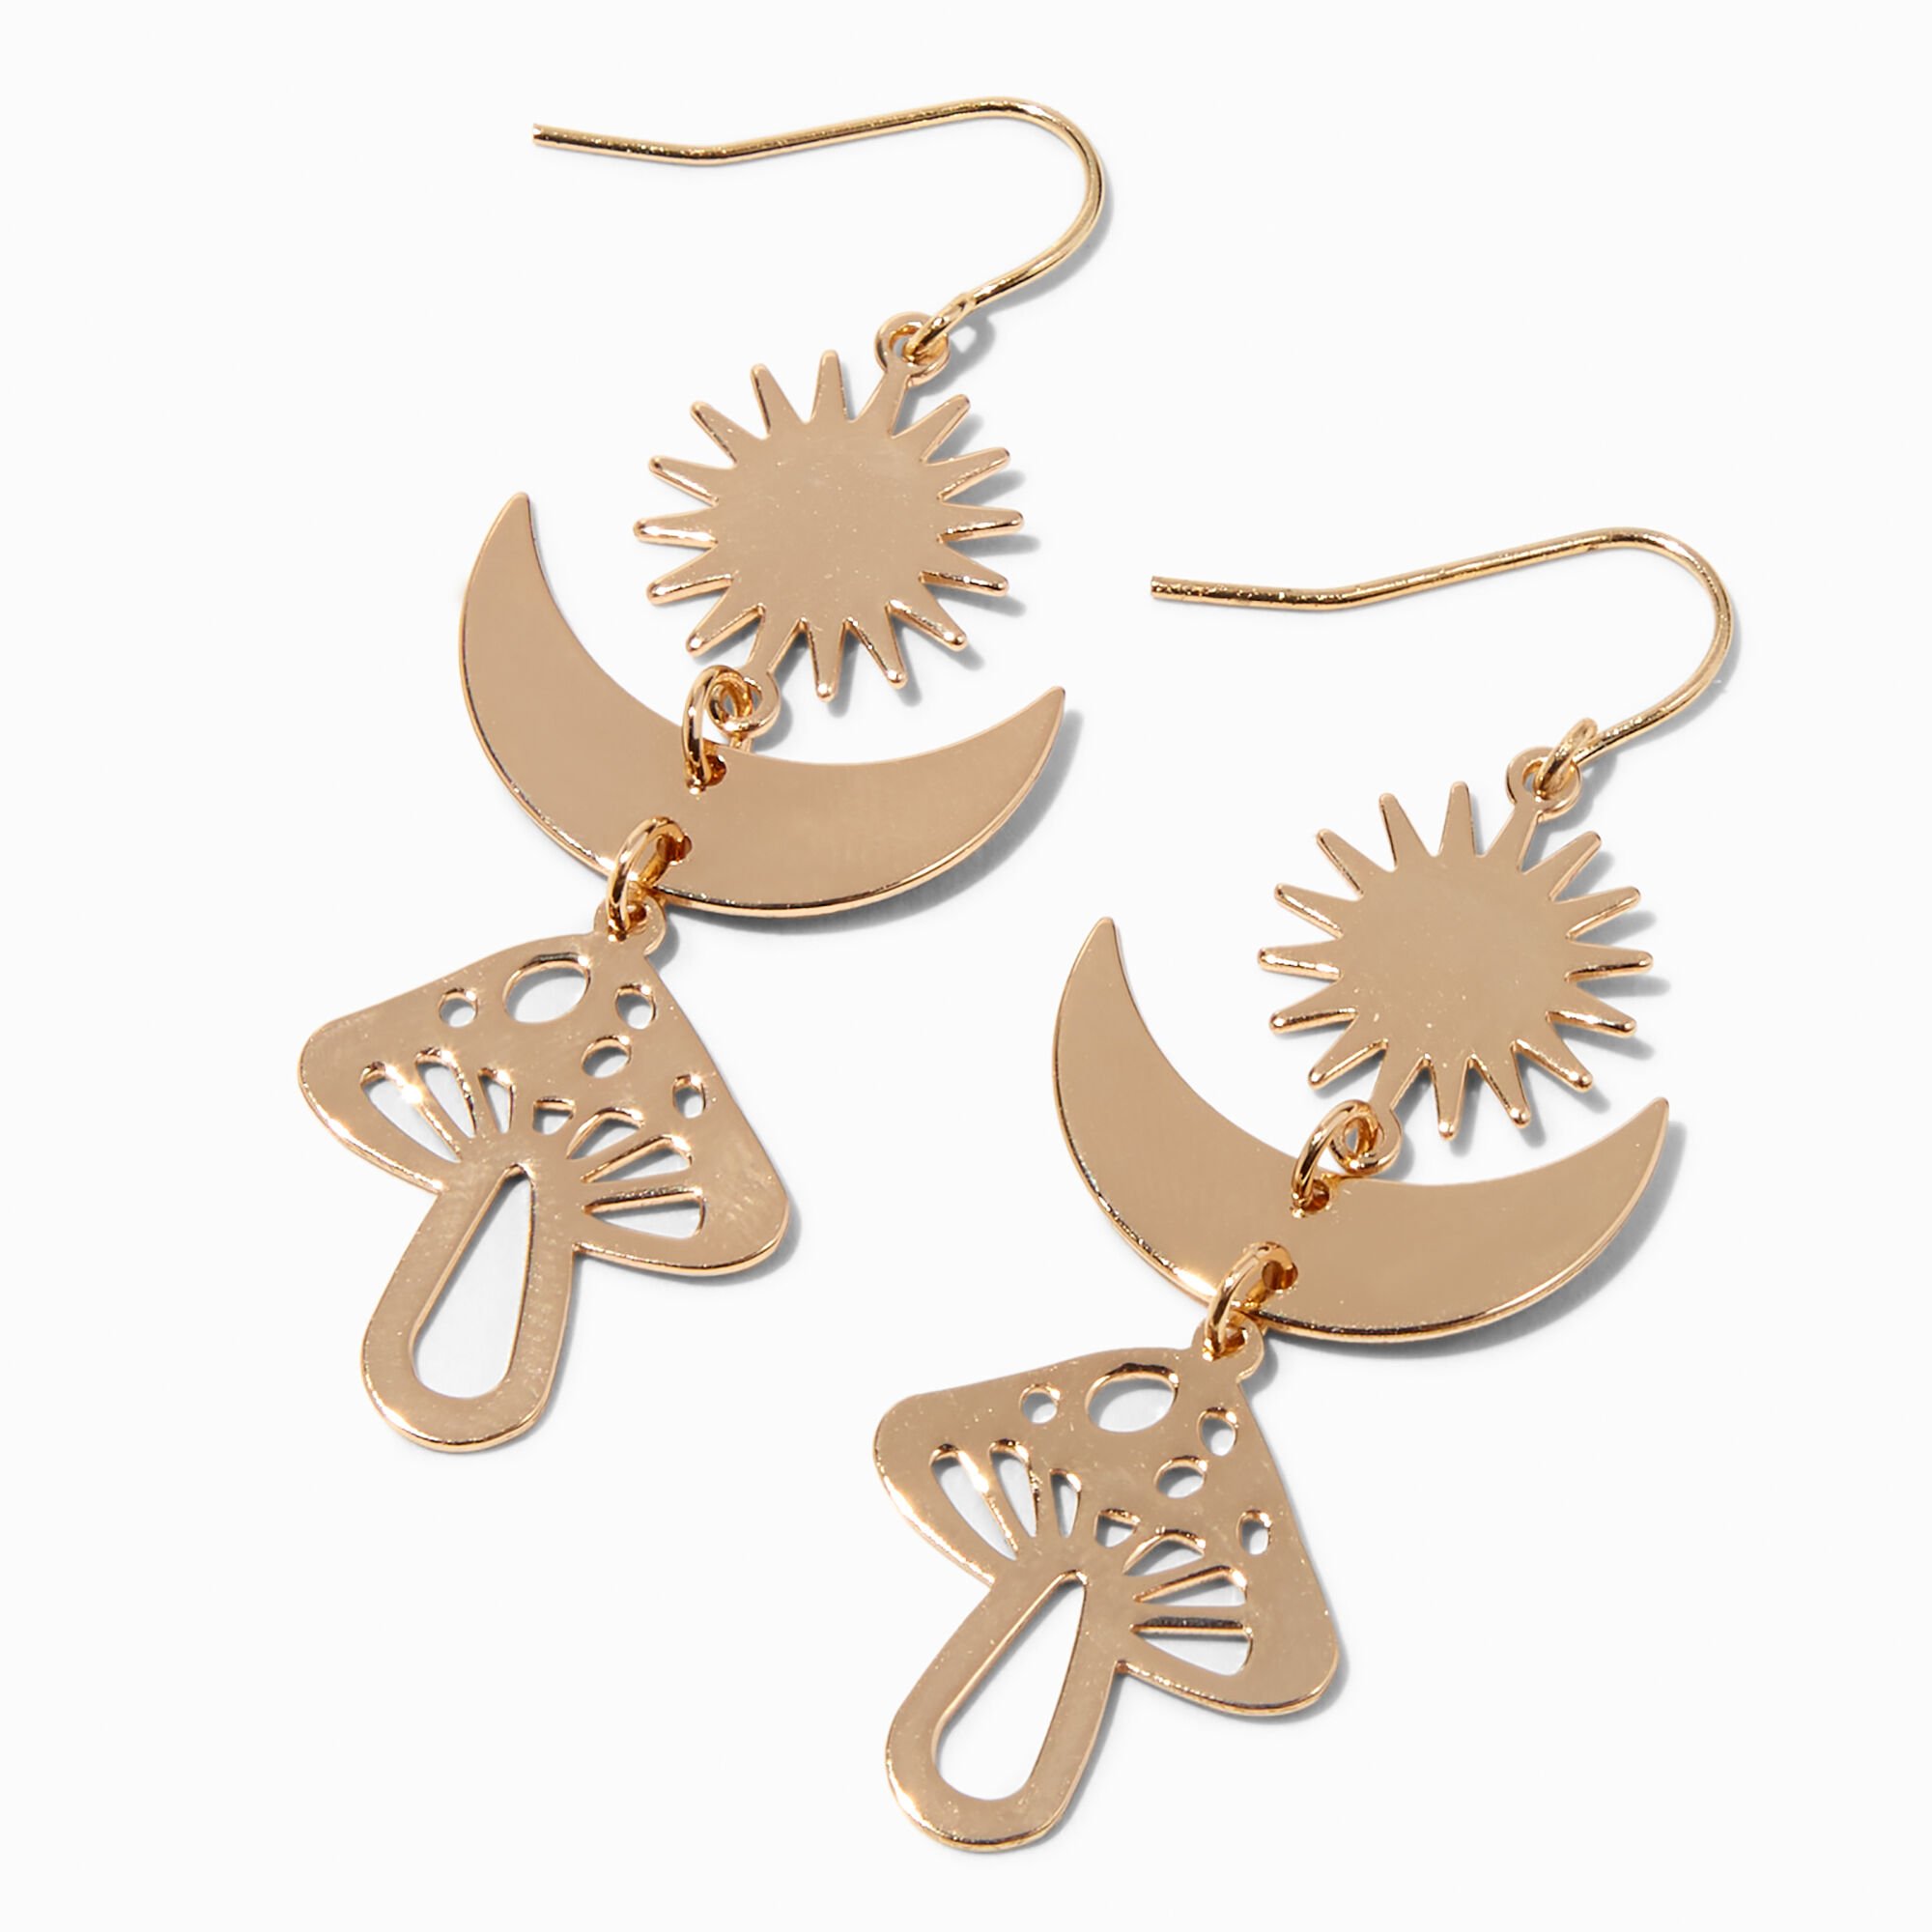 View Claires Tone Celestial Vibe 2 Drop Earrings Gold information